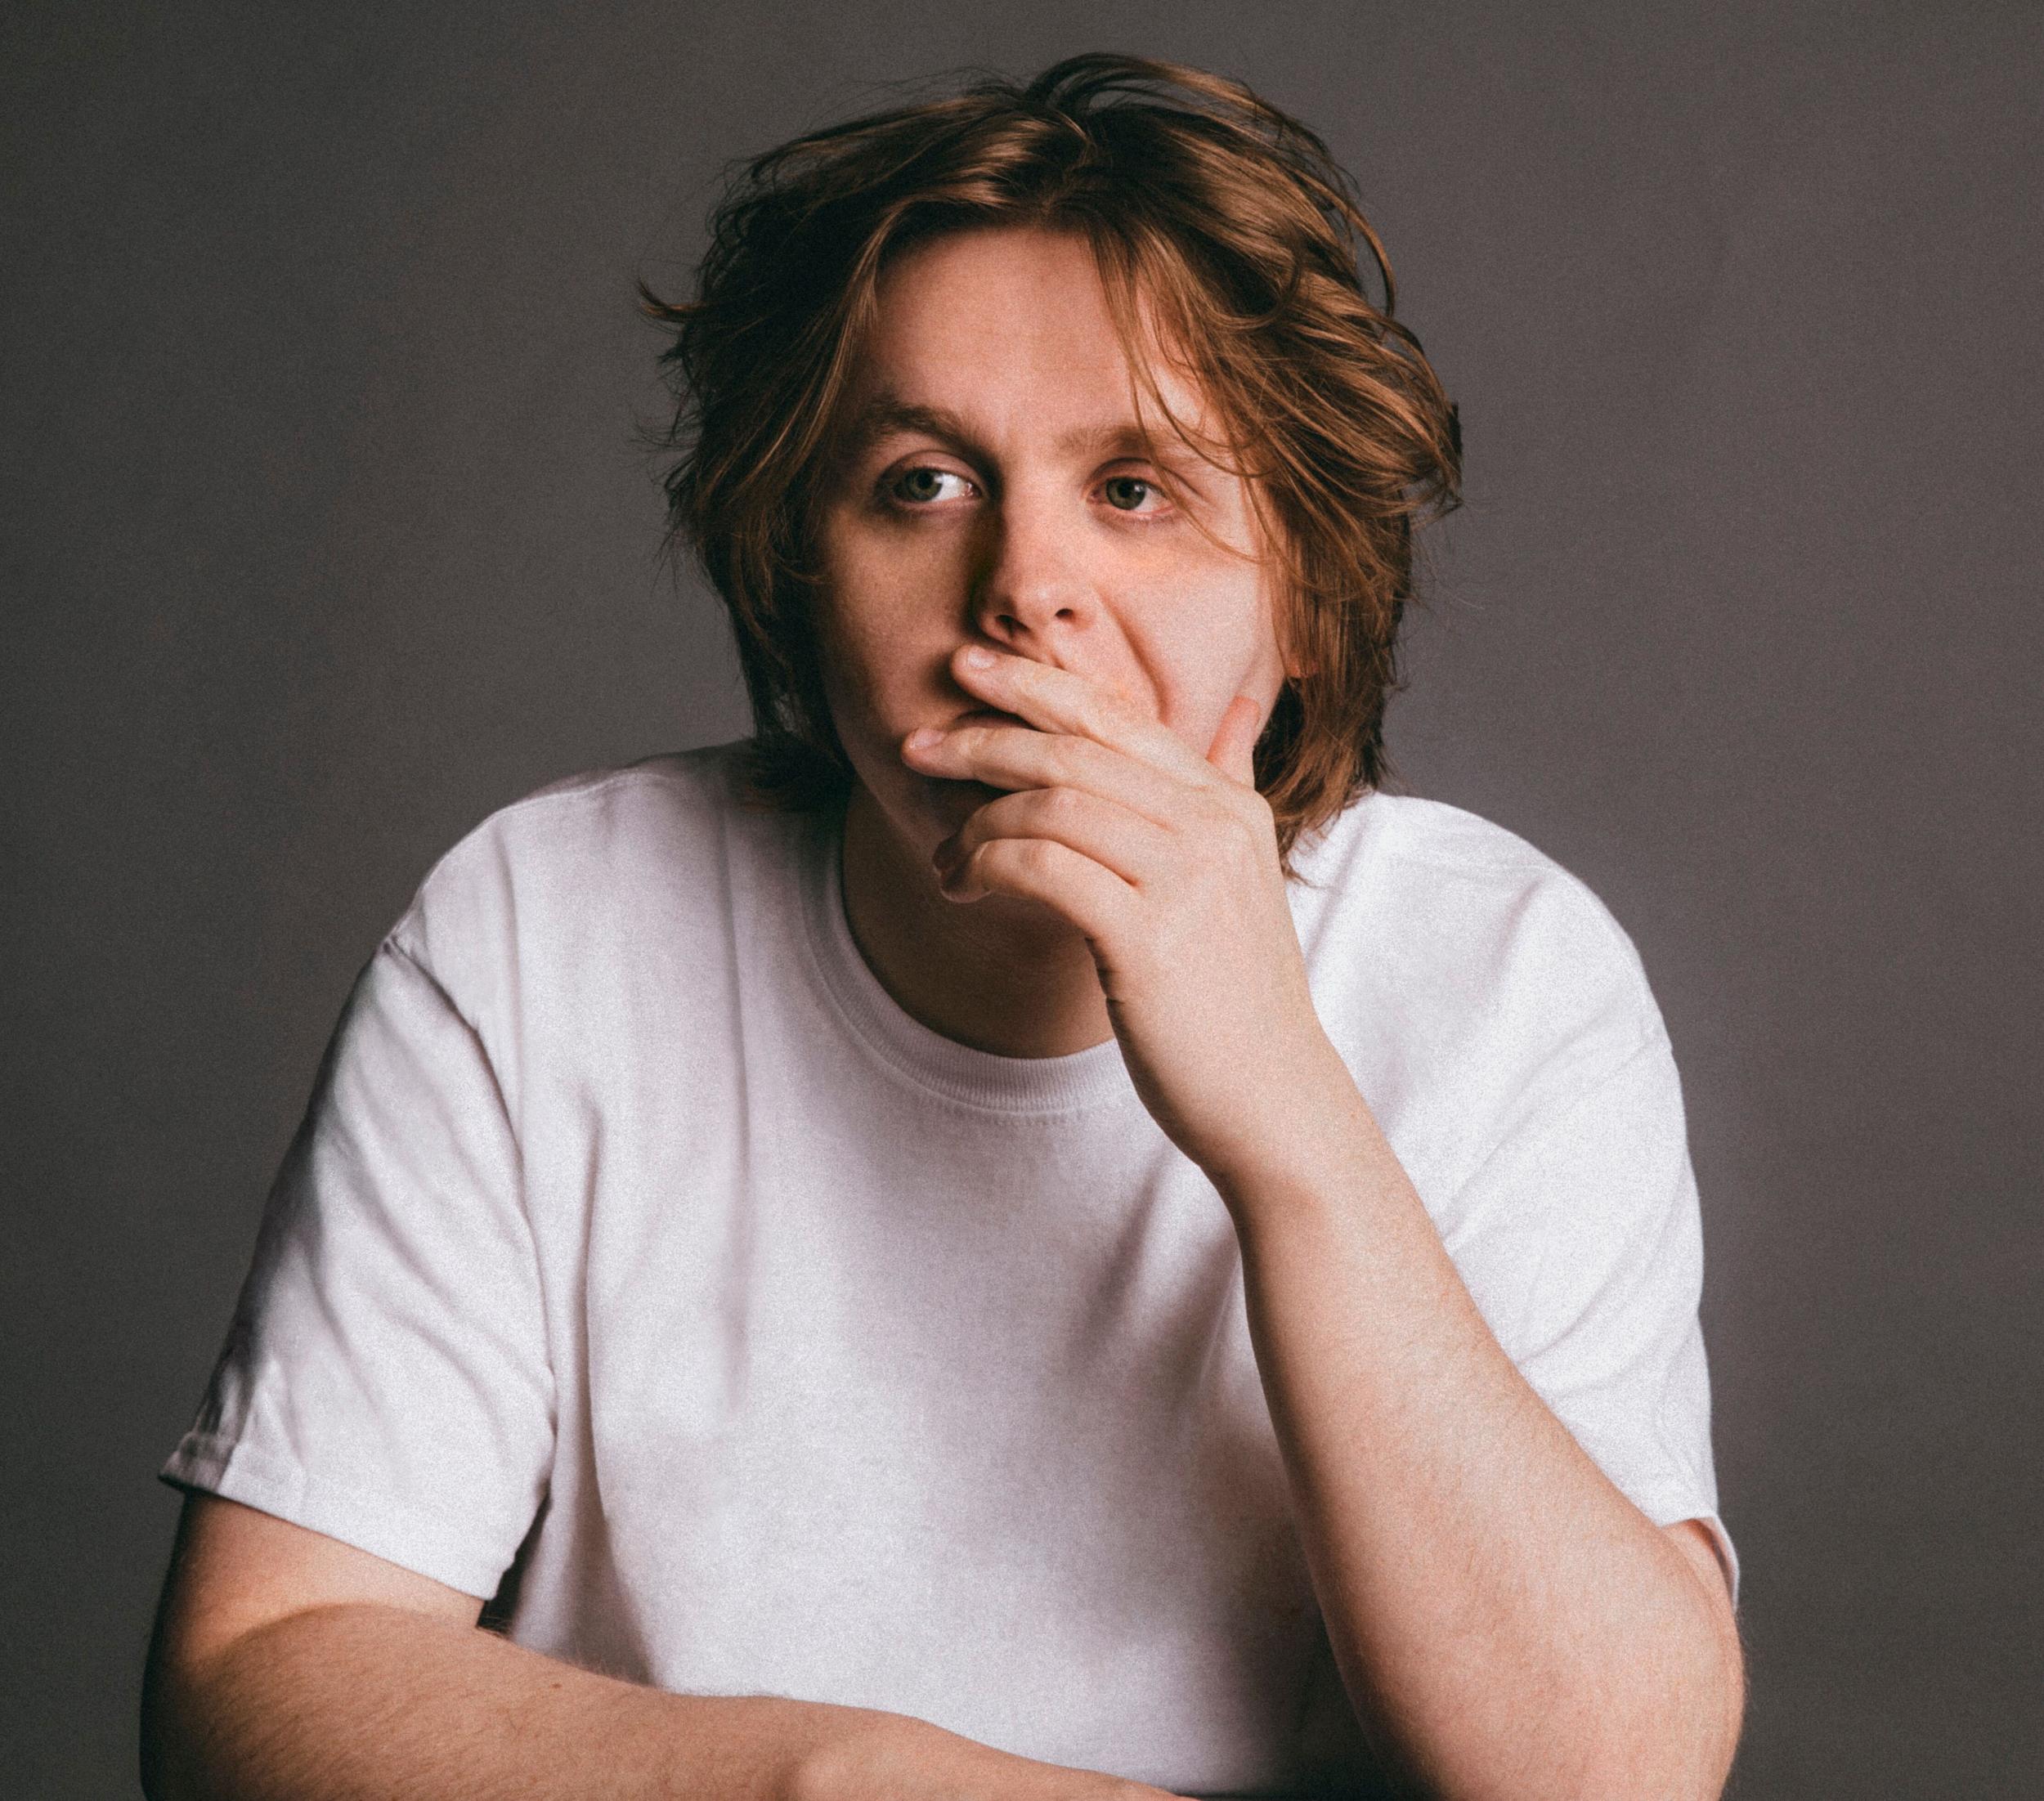 Lewis Capaldi Divinely Uninspired To A Hellish Extent Vinyl Record